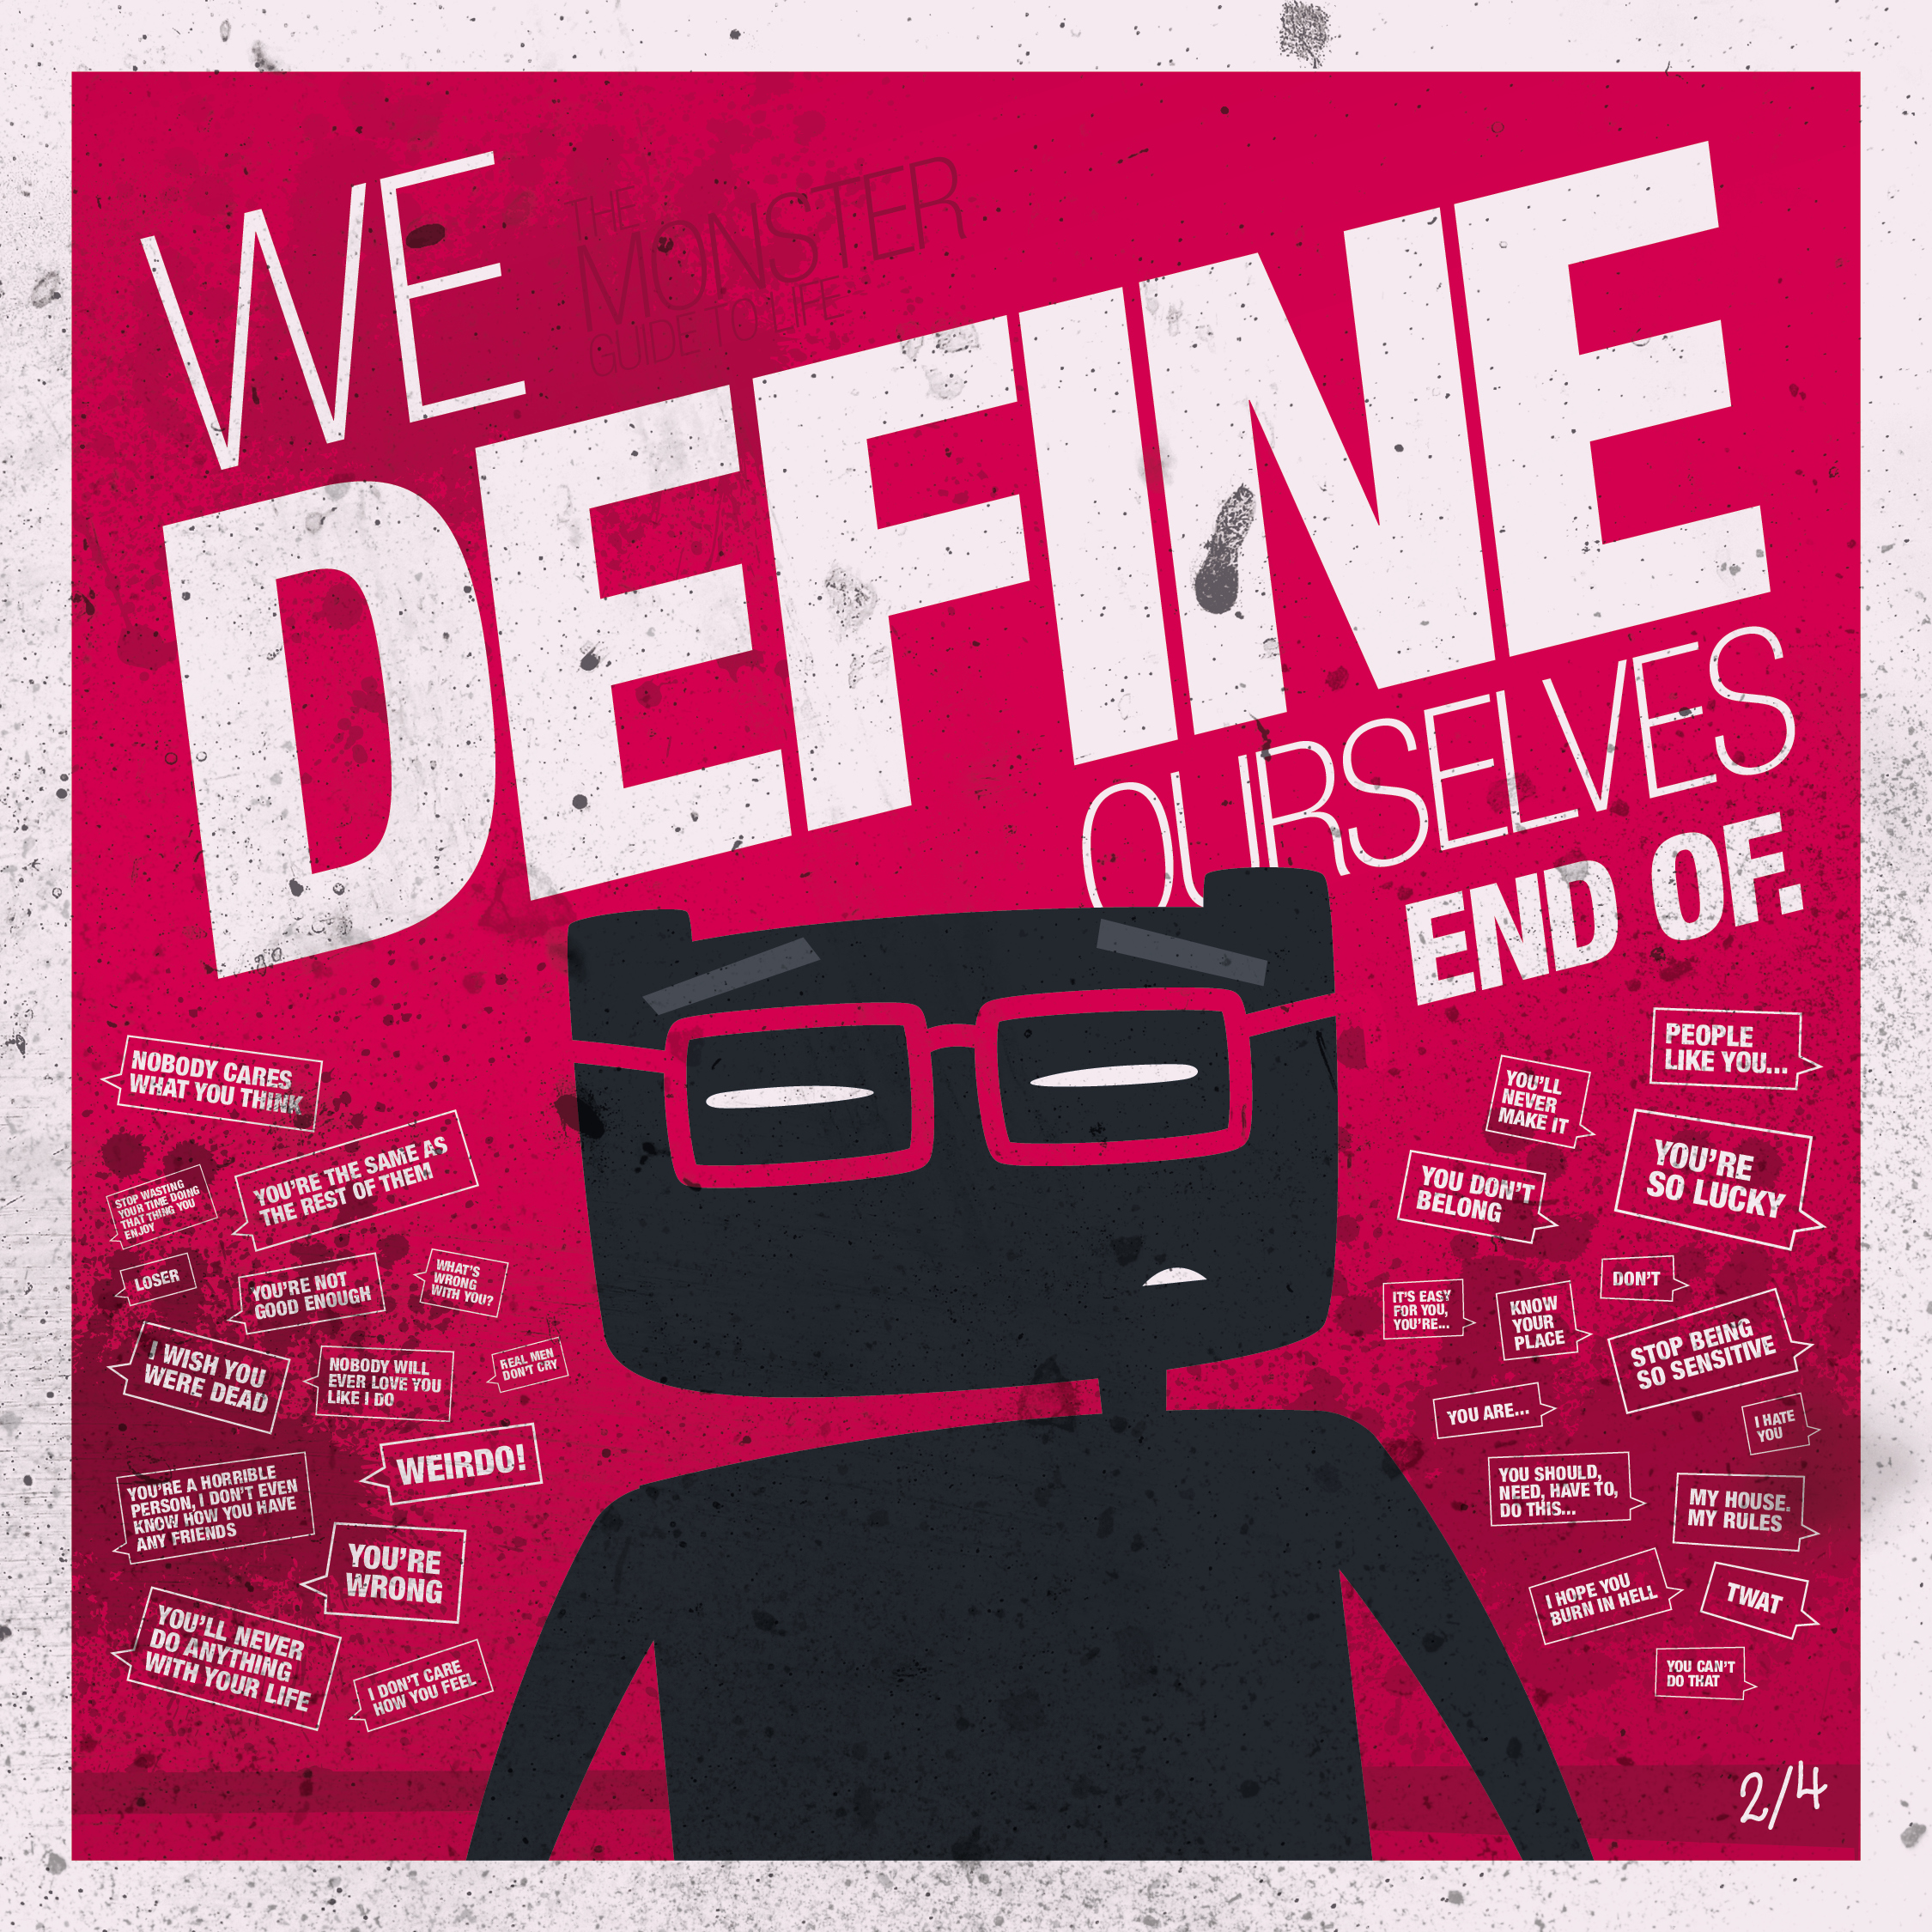 We Define Ourselves. End Of.